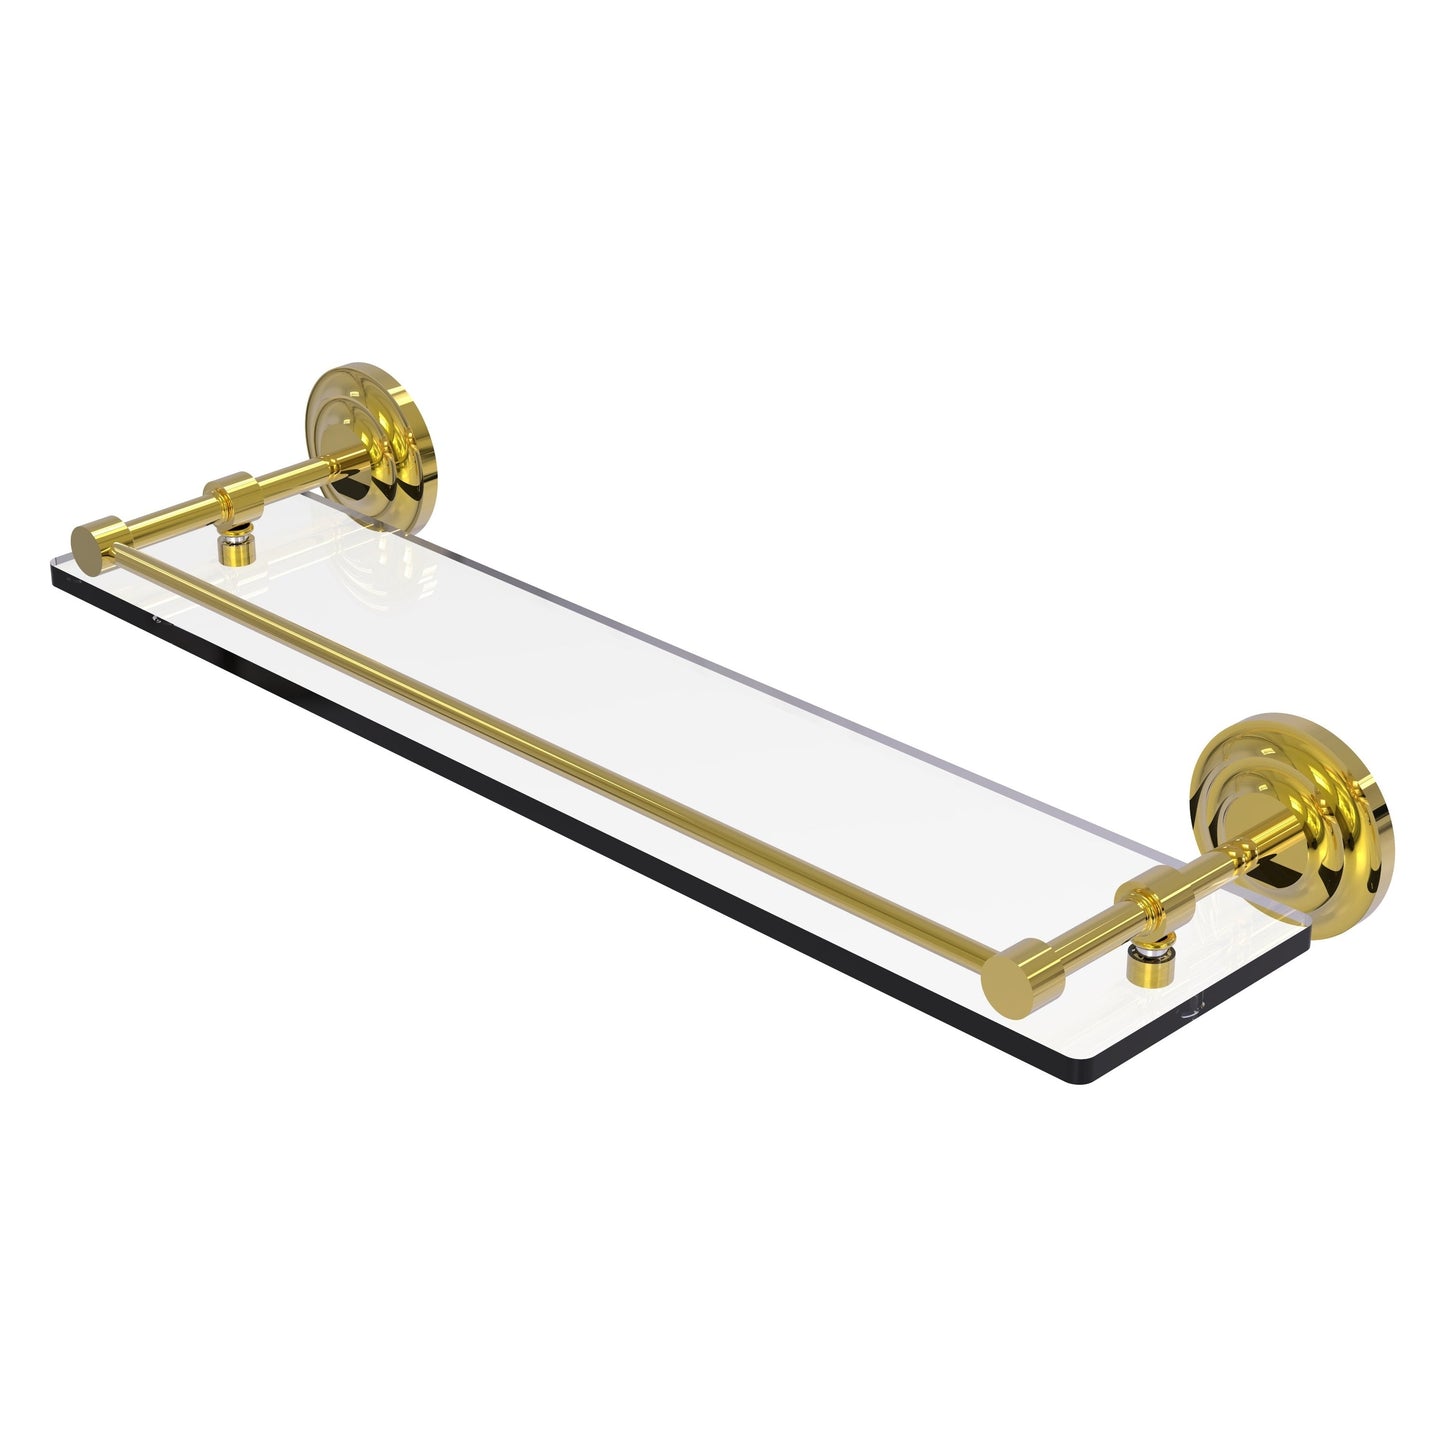 Allied Brass Que New 22" x 5" Polished Brass Solid Brass 22-Inch Tempered Glass Shelf With Gallery Rail